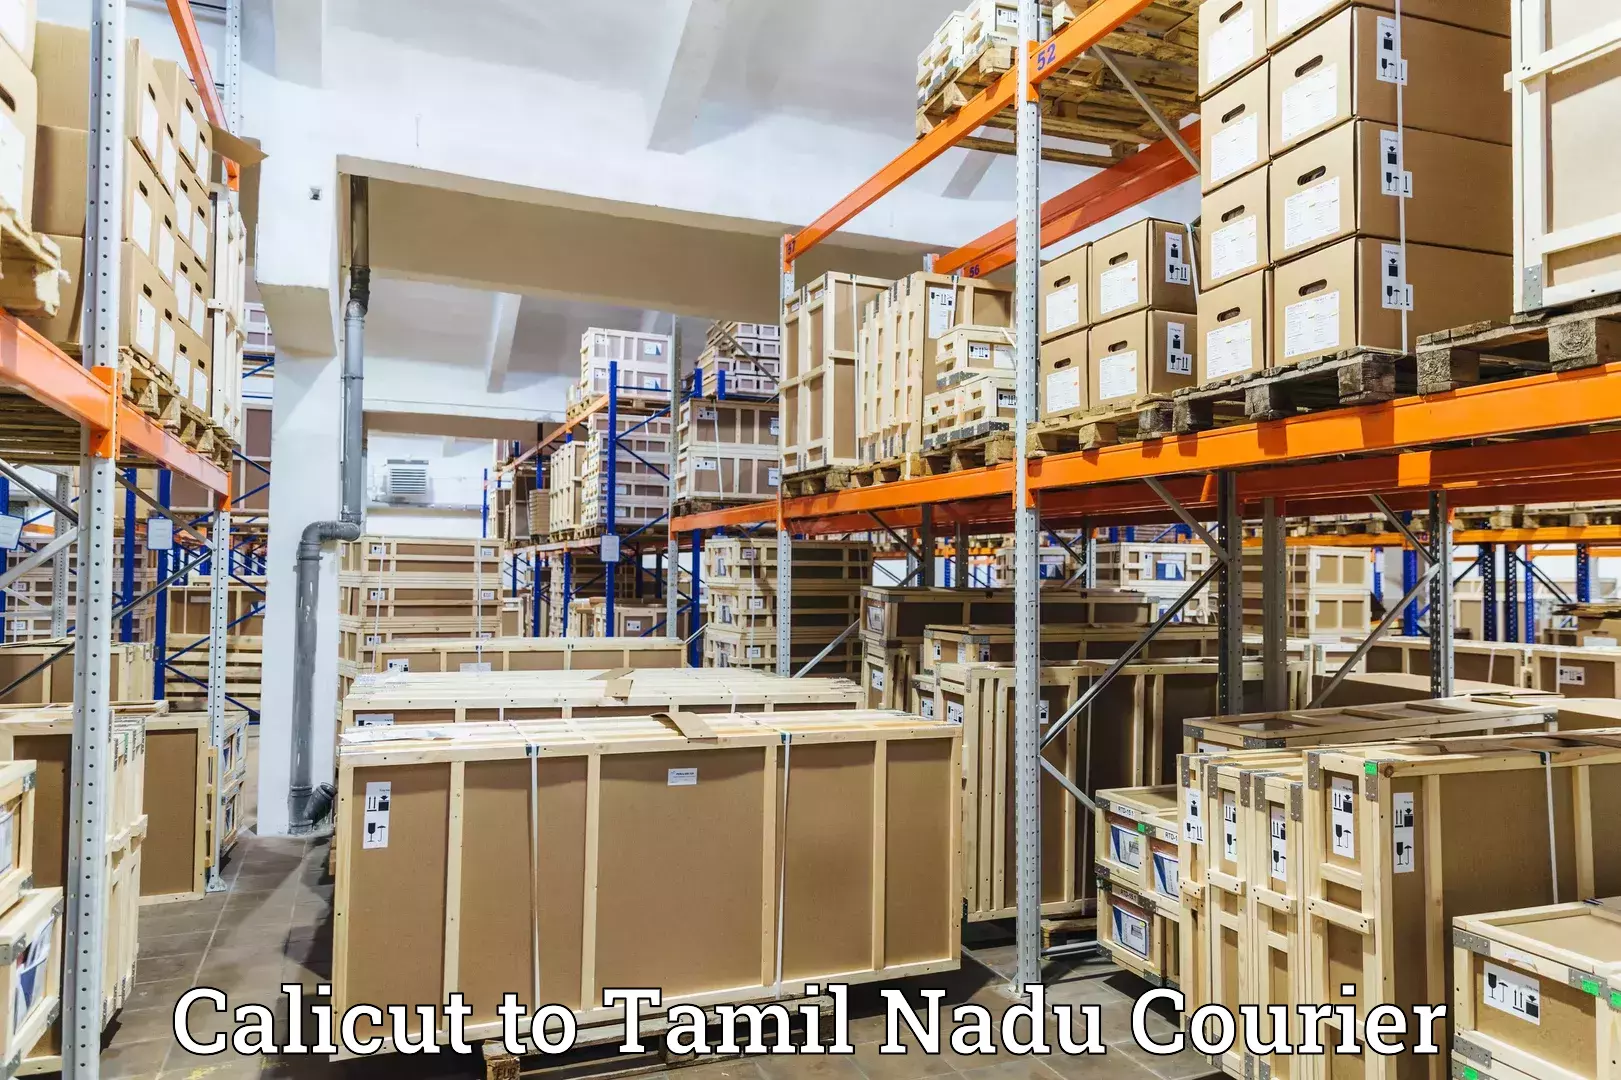 Courier service booking in Calicut to Chennai